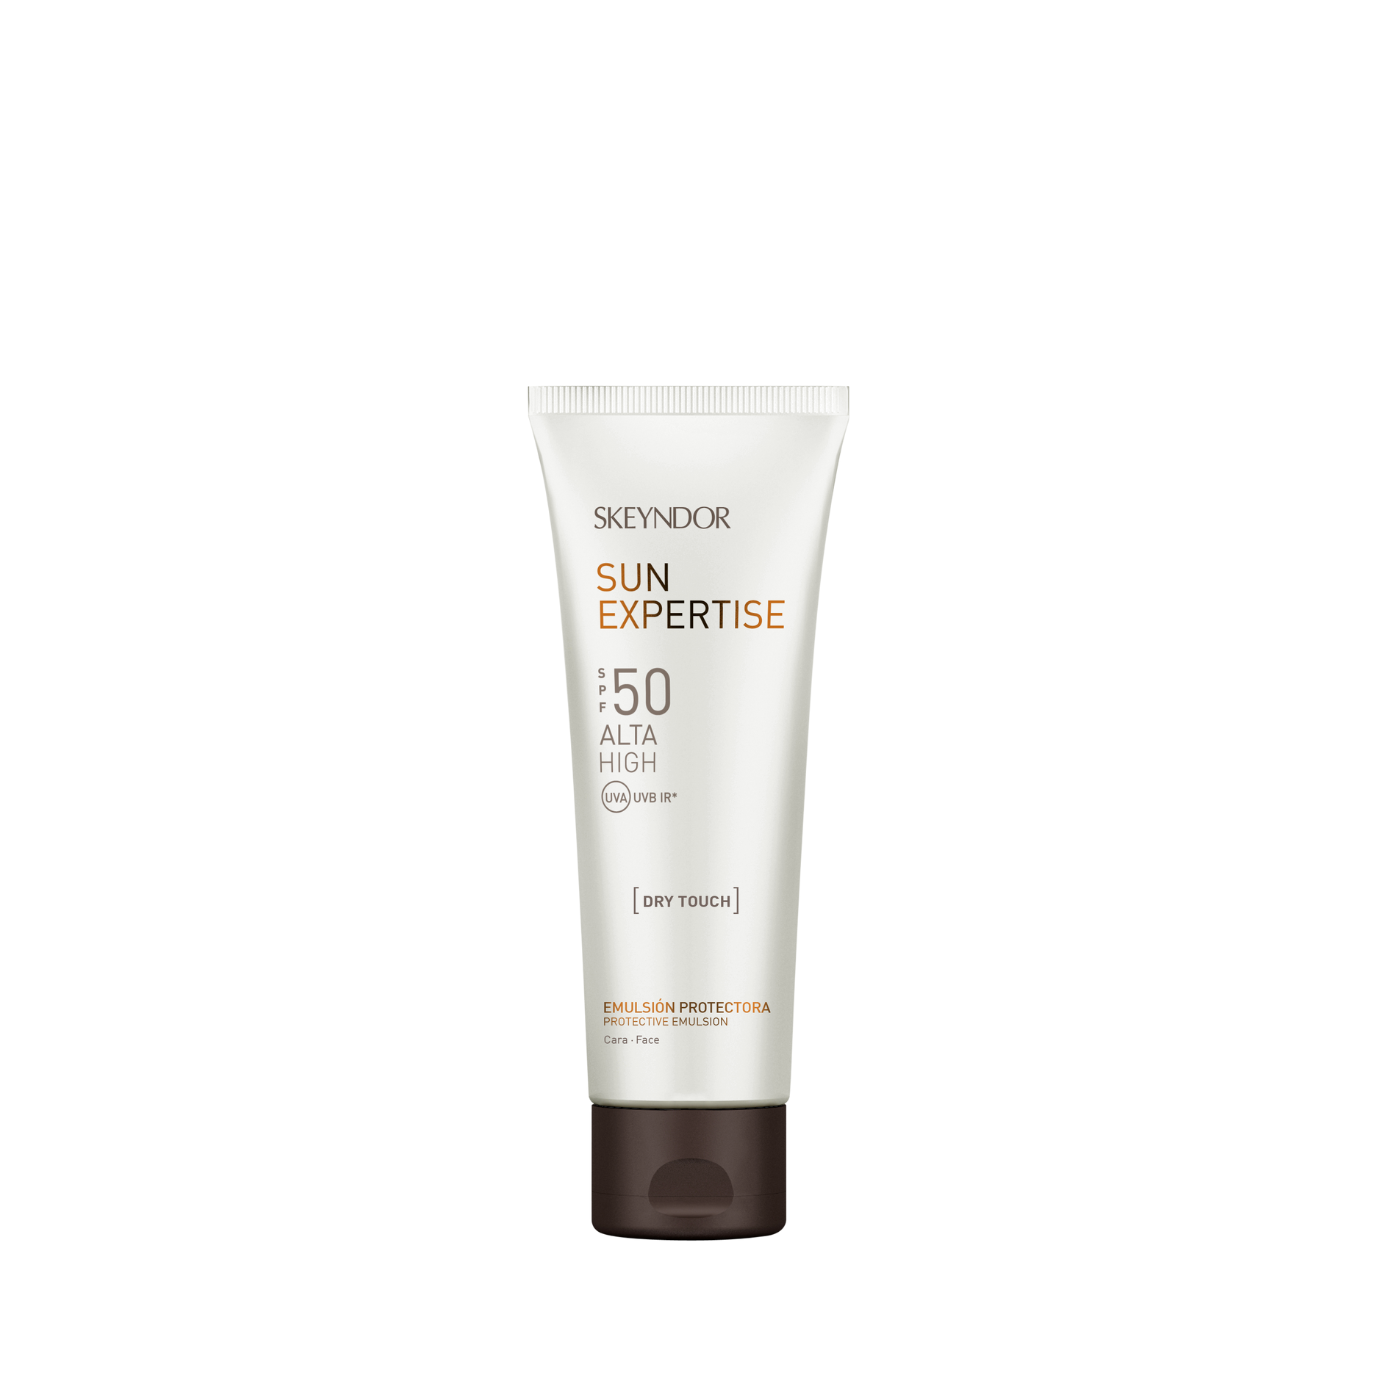 Sun Expertise Dry Touch Protective Emulsion SPF50